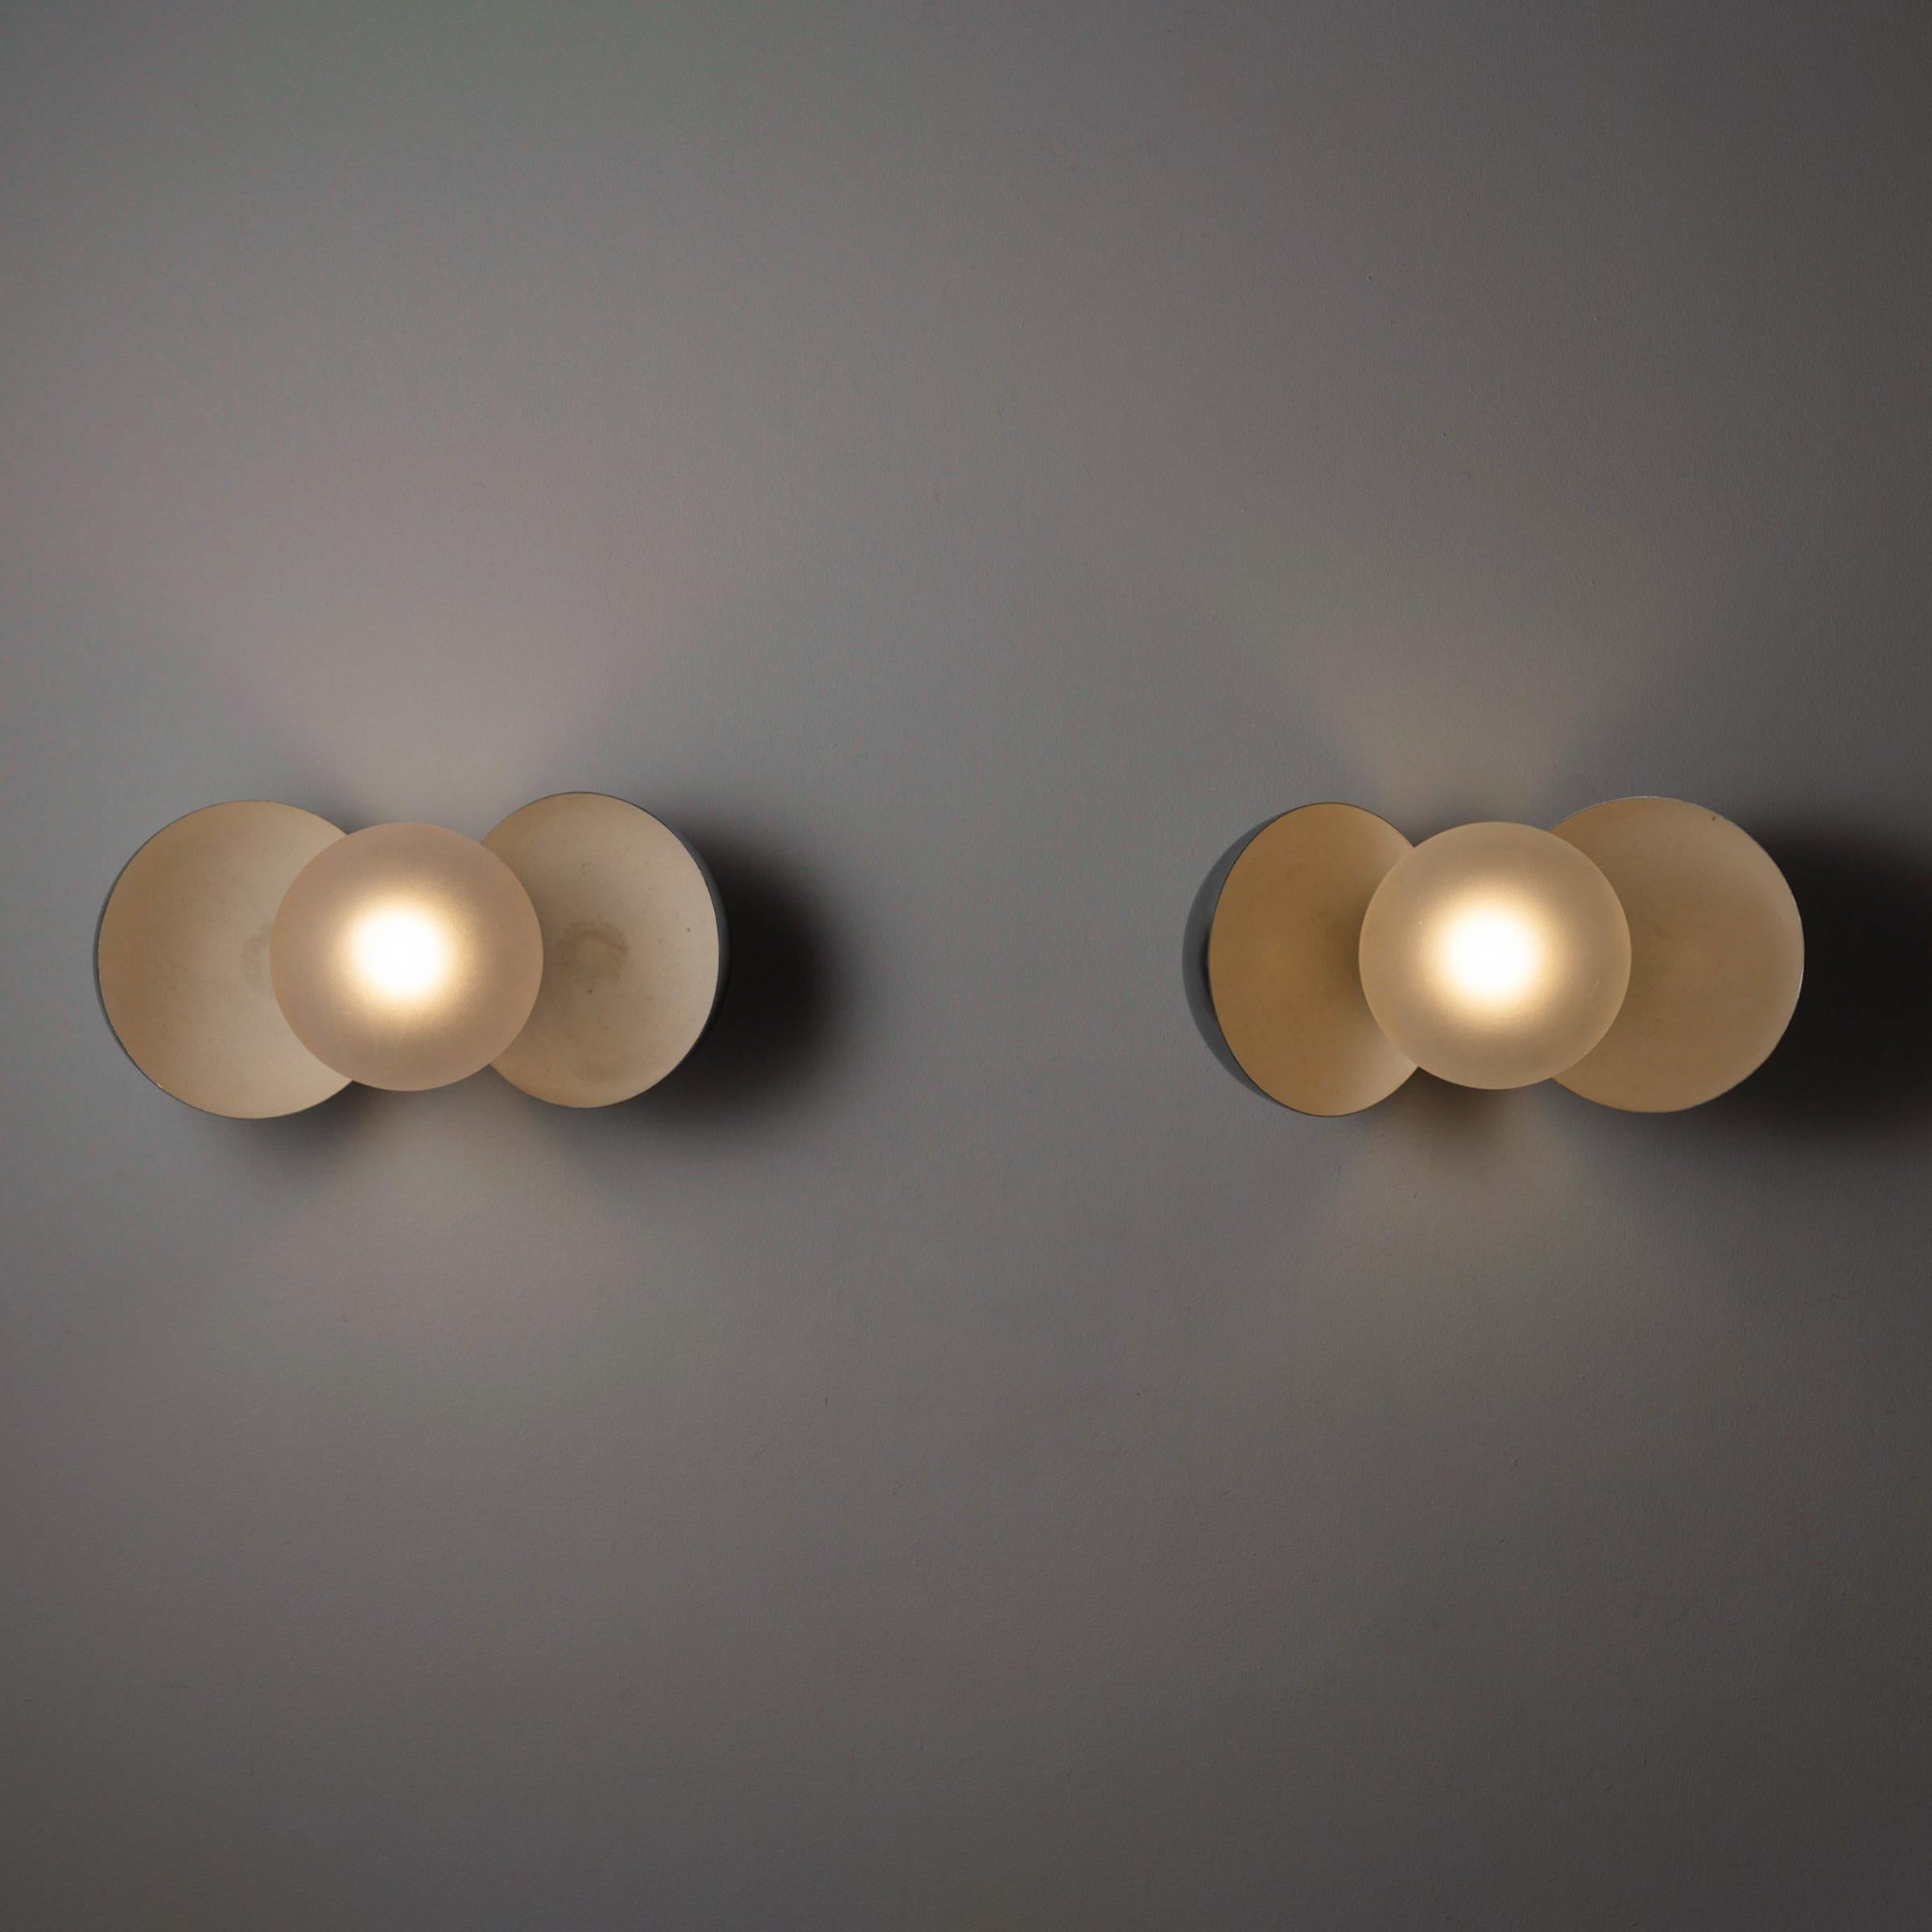 Frosted Rare Pair of Diaframma Sconces by G. Piero & A. Monti for Fontana Arte